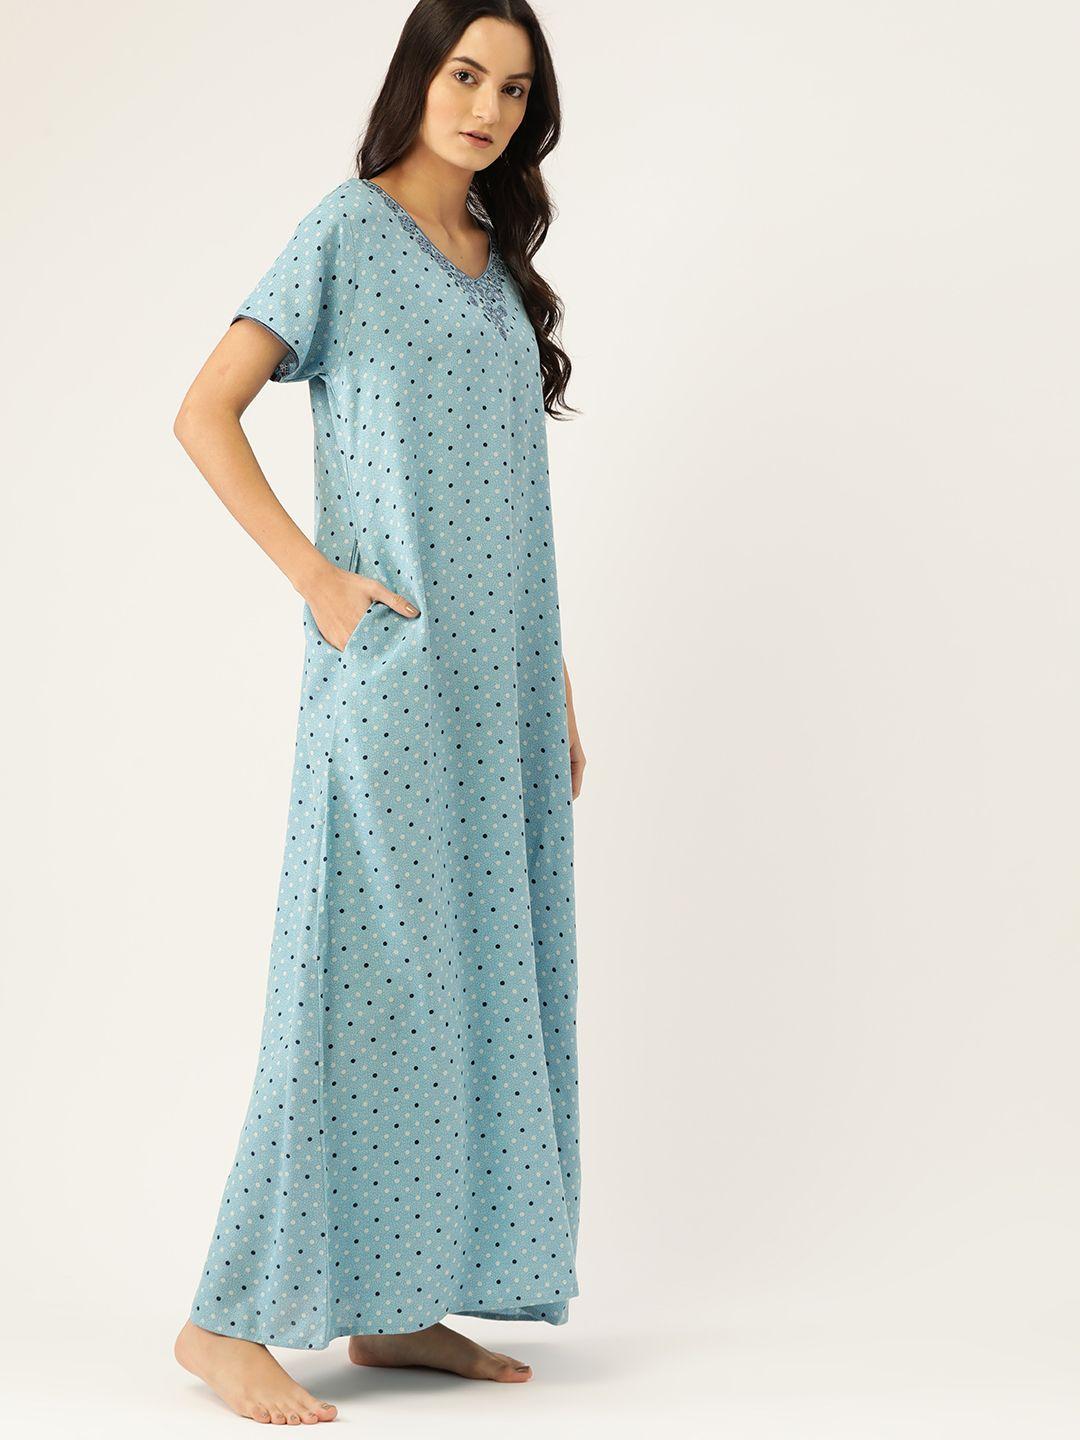 etc blue & white polka dot print maxi nightdress with floral embroidered detail